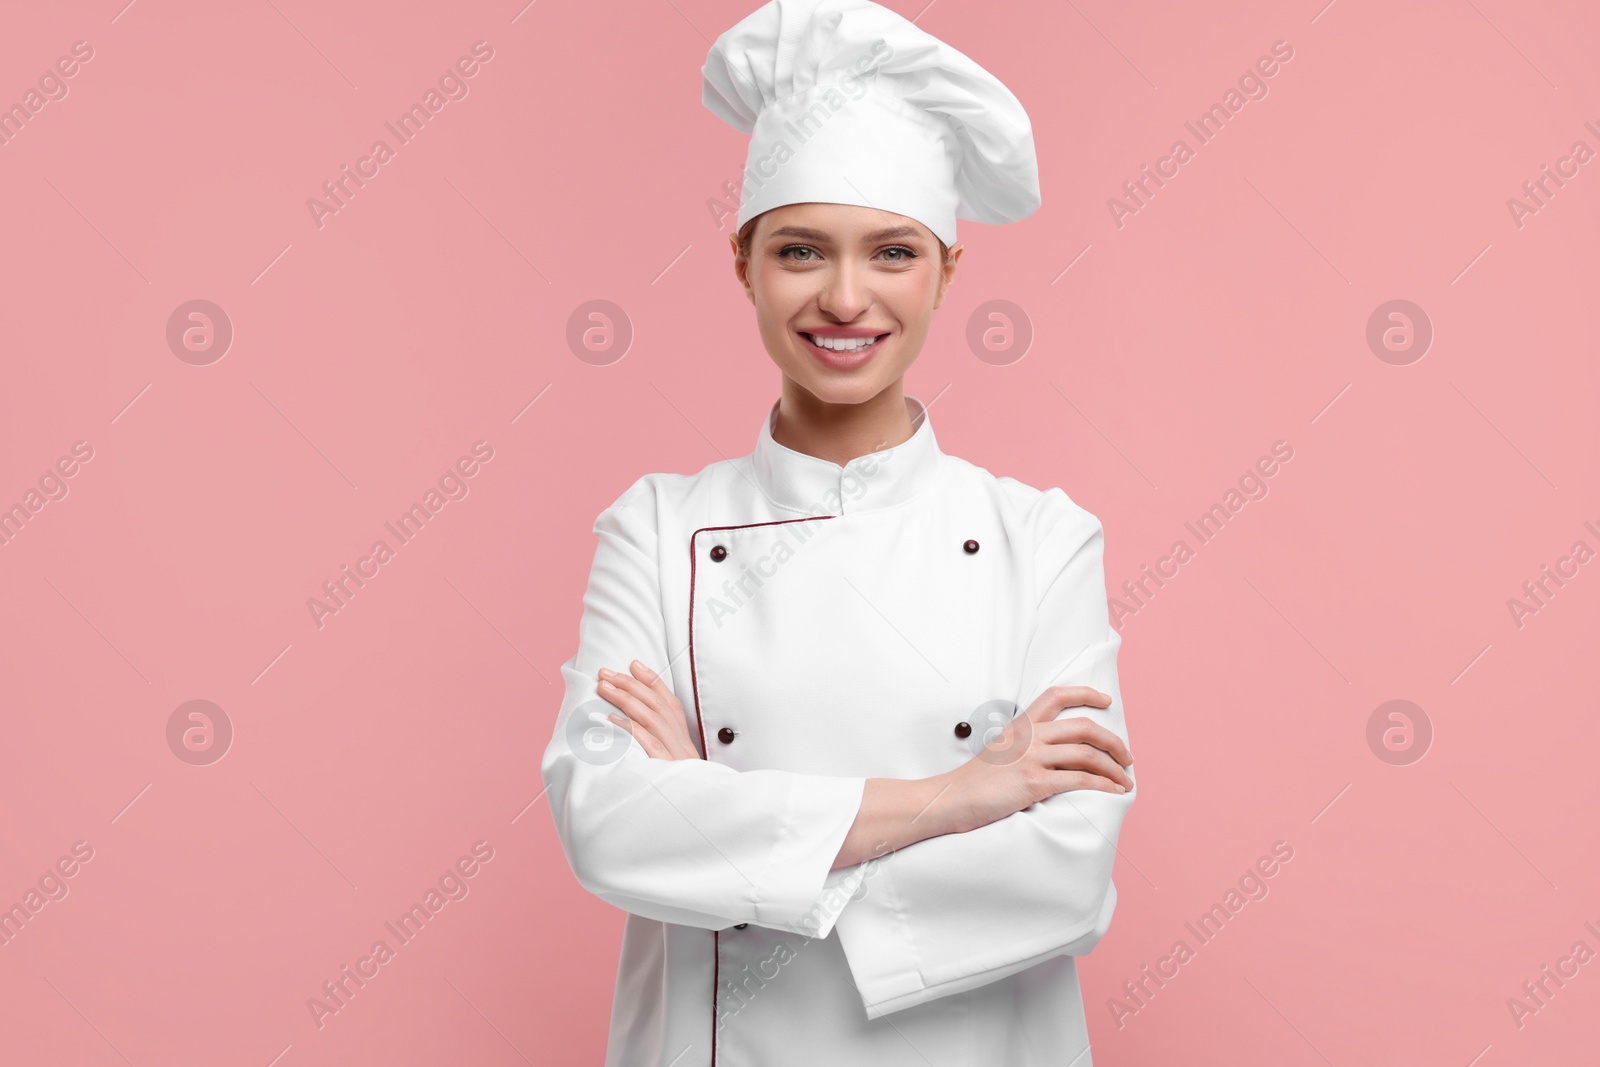 Photo of Happy woman chef in uniform on pink background